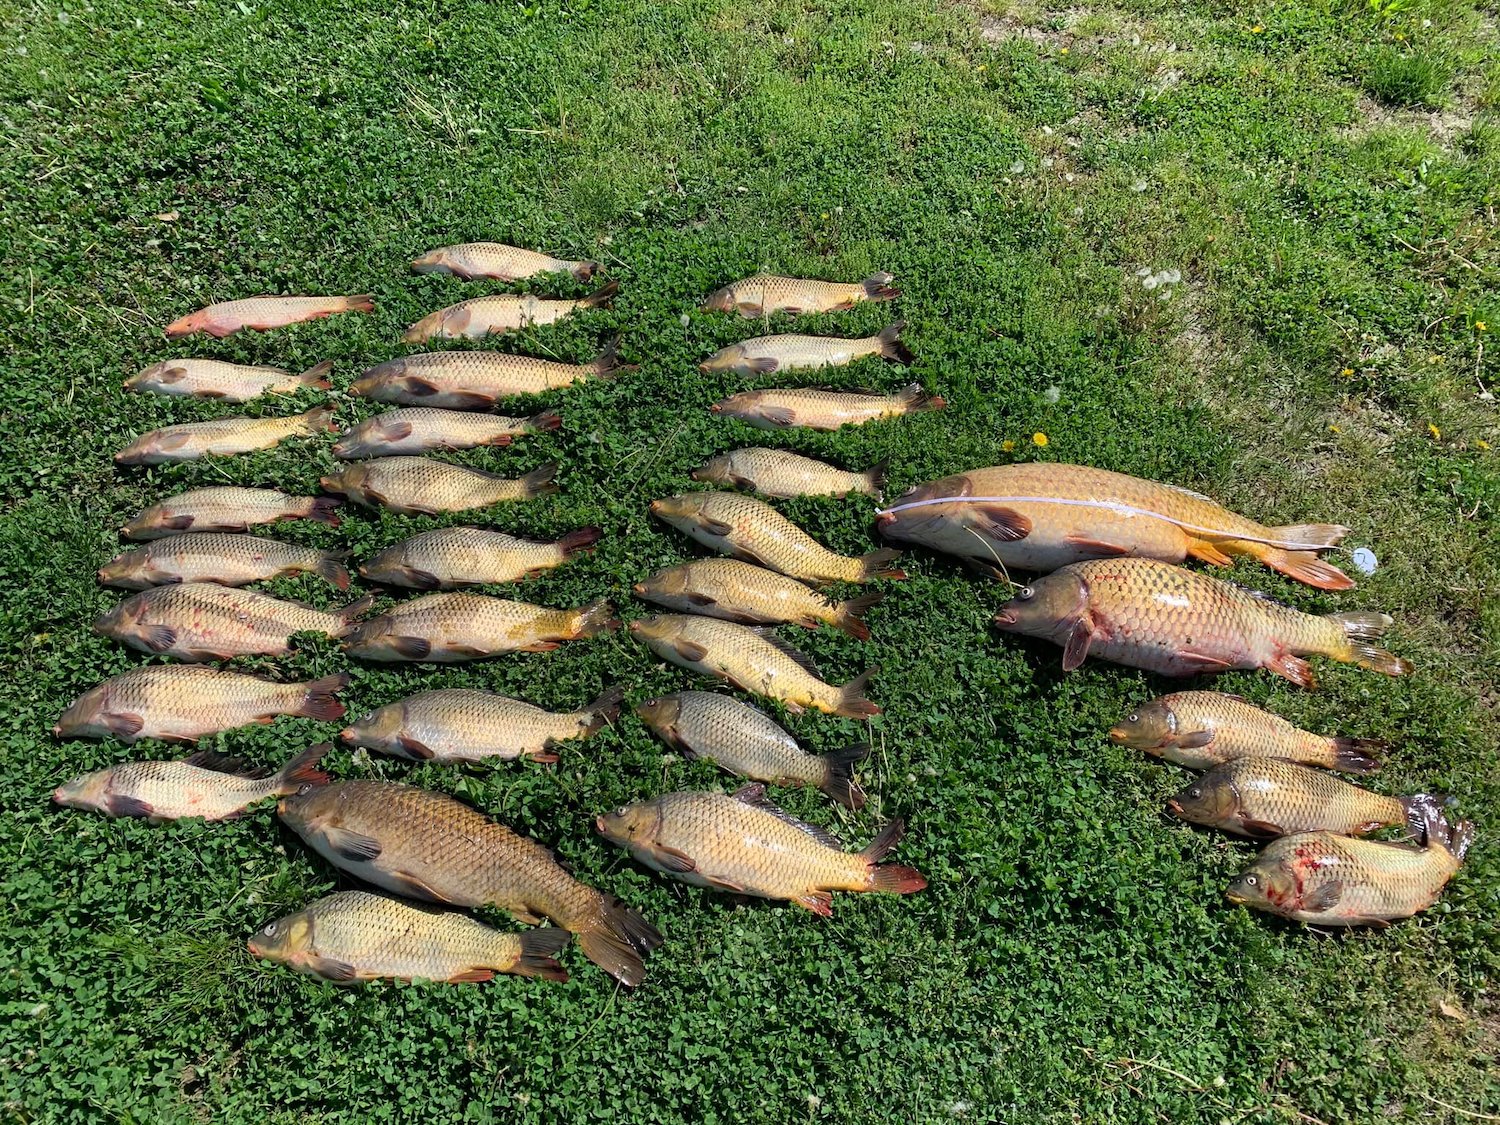 Anglers Fined Thousands for Keeping Too Many Carp